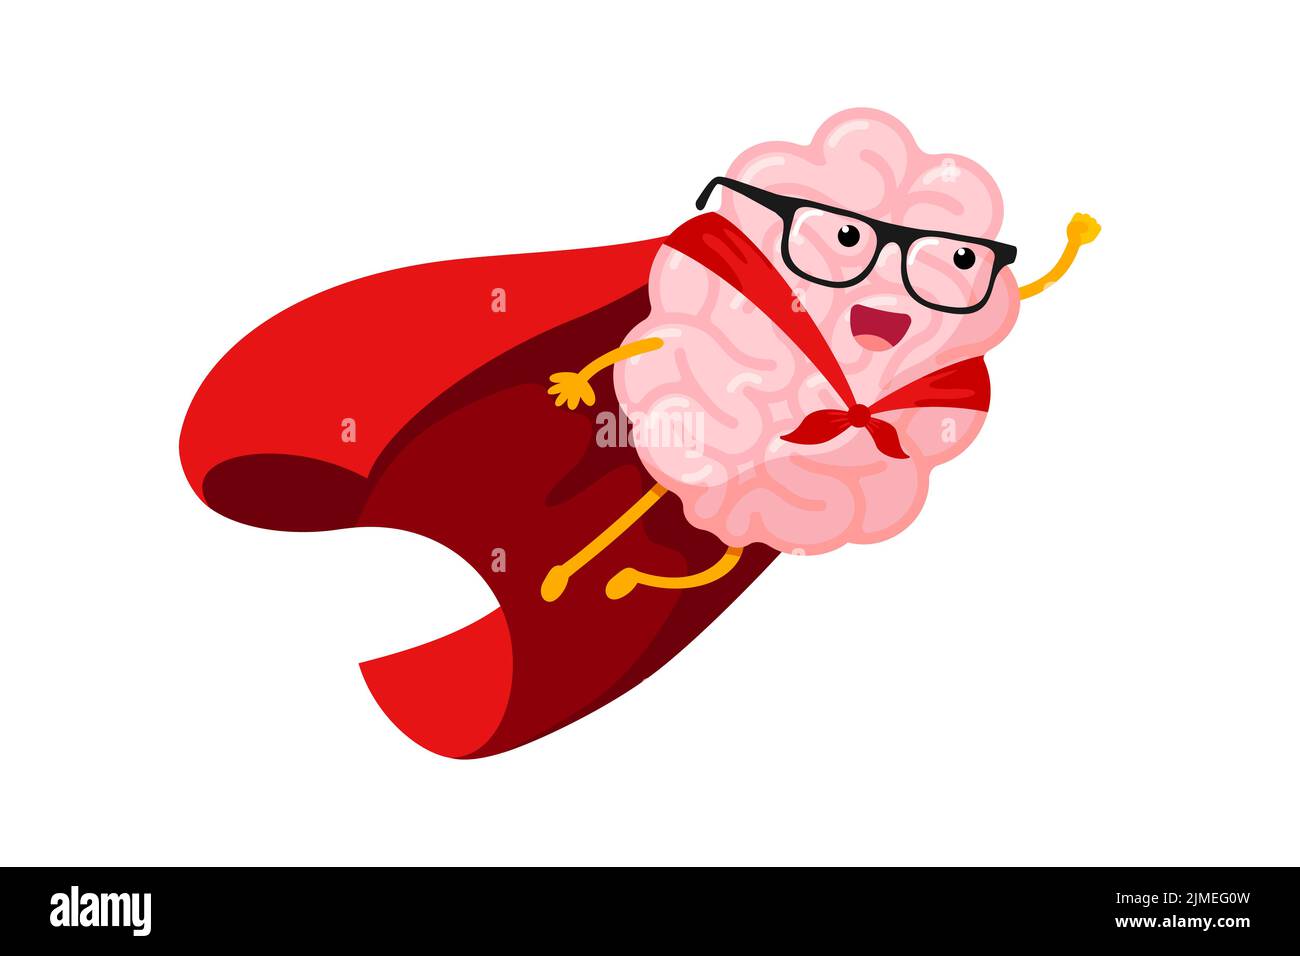 Cartoon human brain fly in sky as super hero. Clever central nervous system mascot superhero with glasses in red coat. Human mind organ character inspiration. Brainstorming and idea concept. Vector Stock Vector